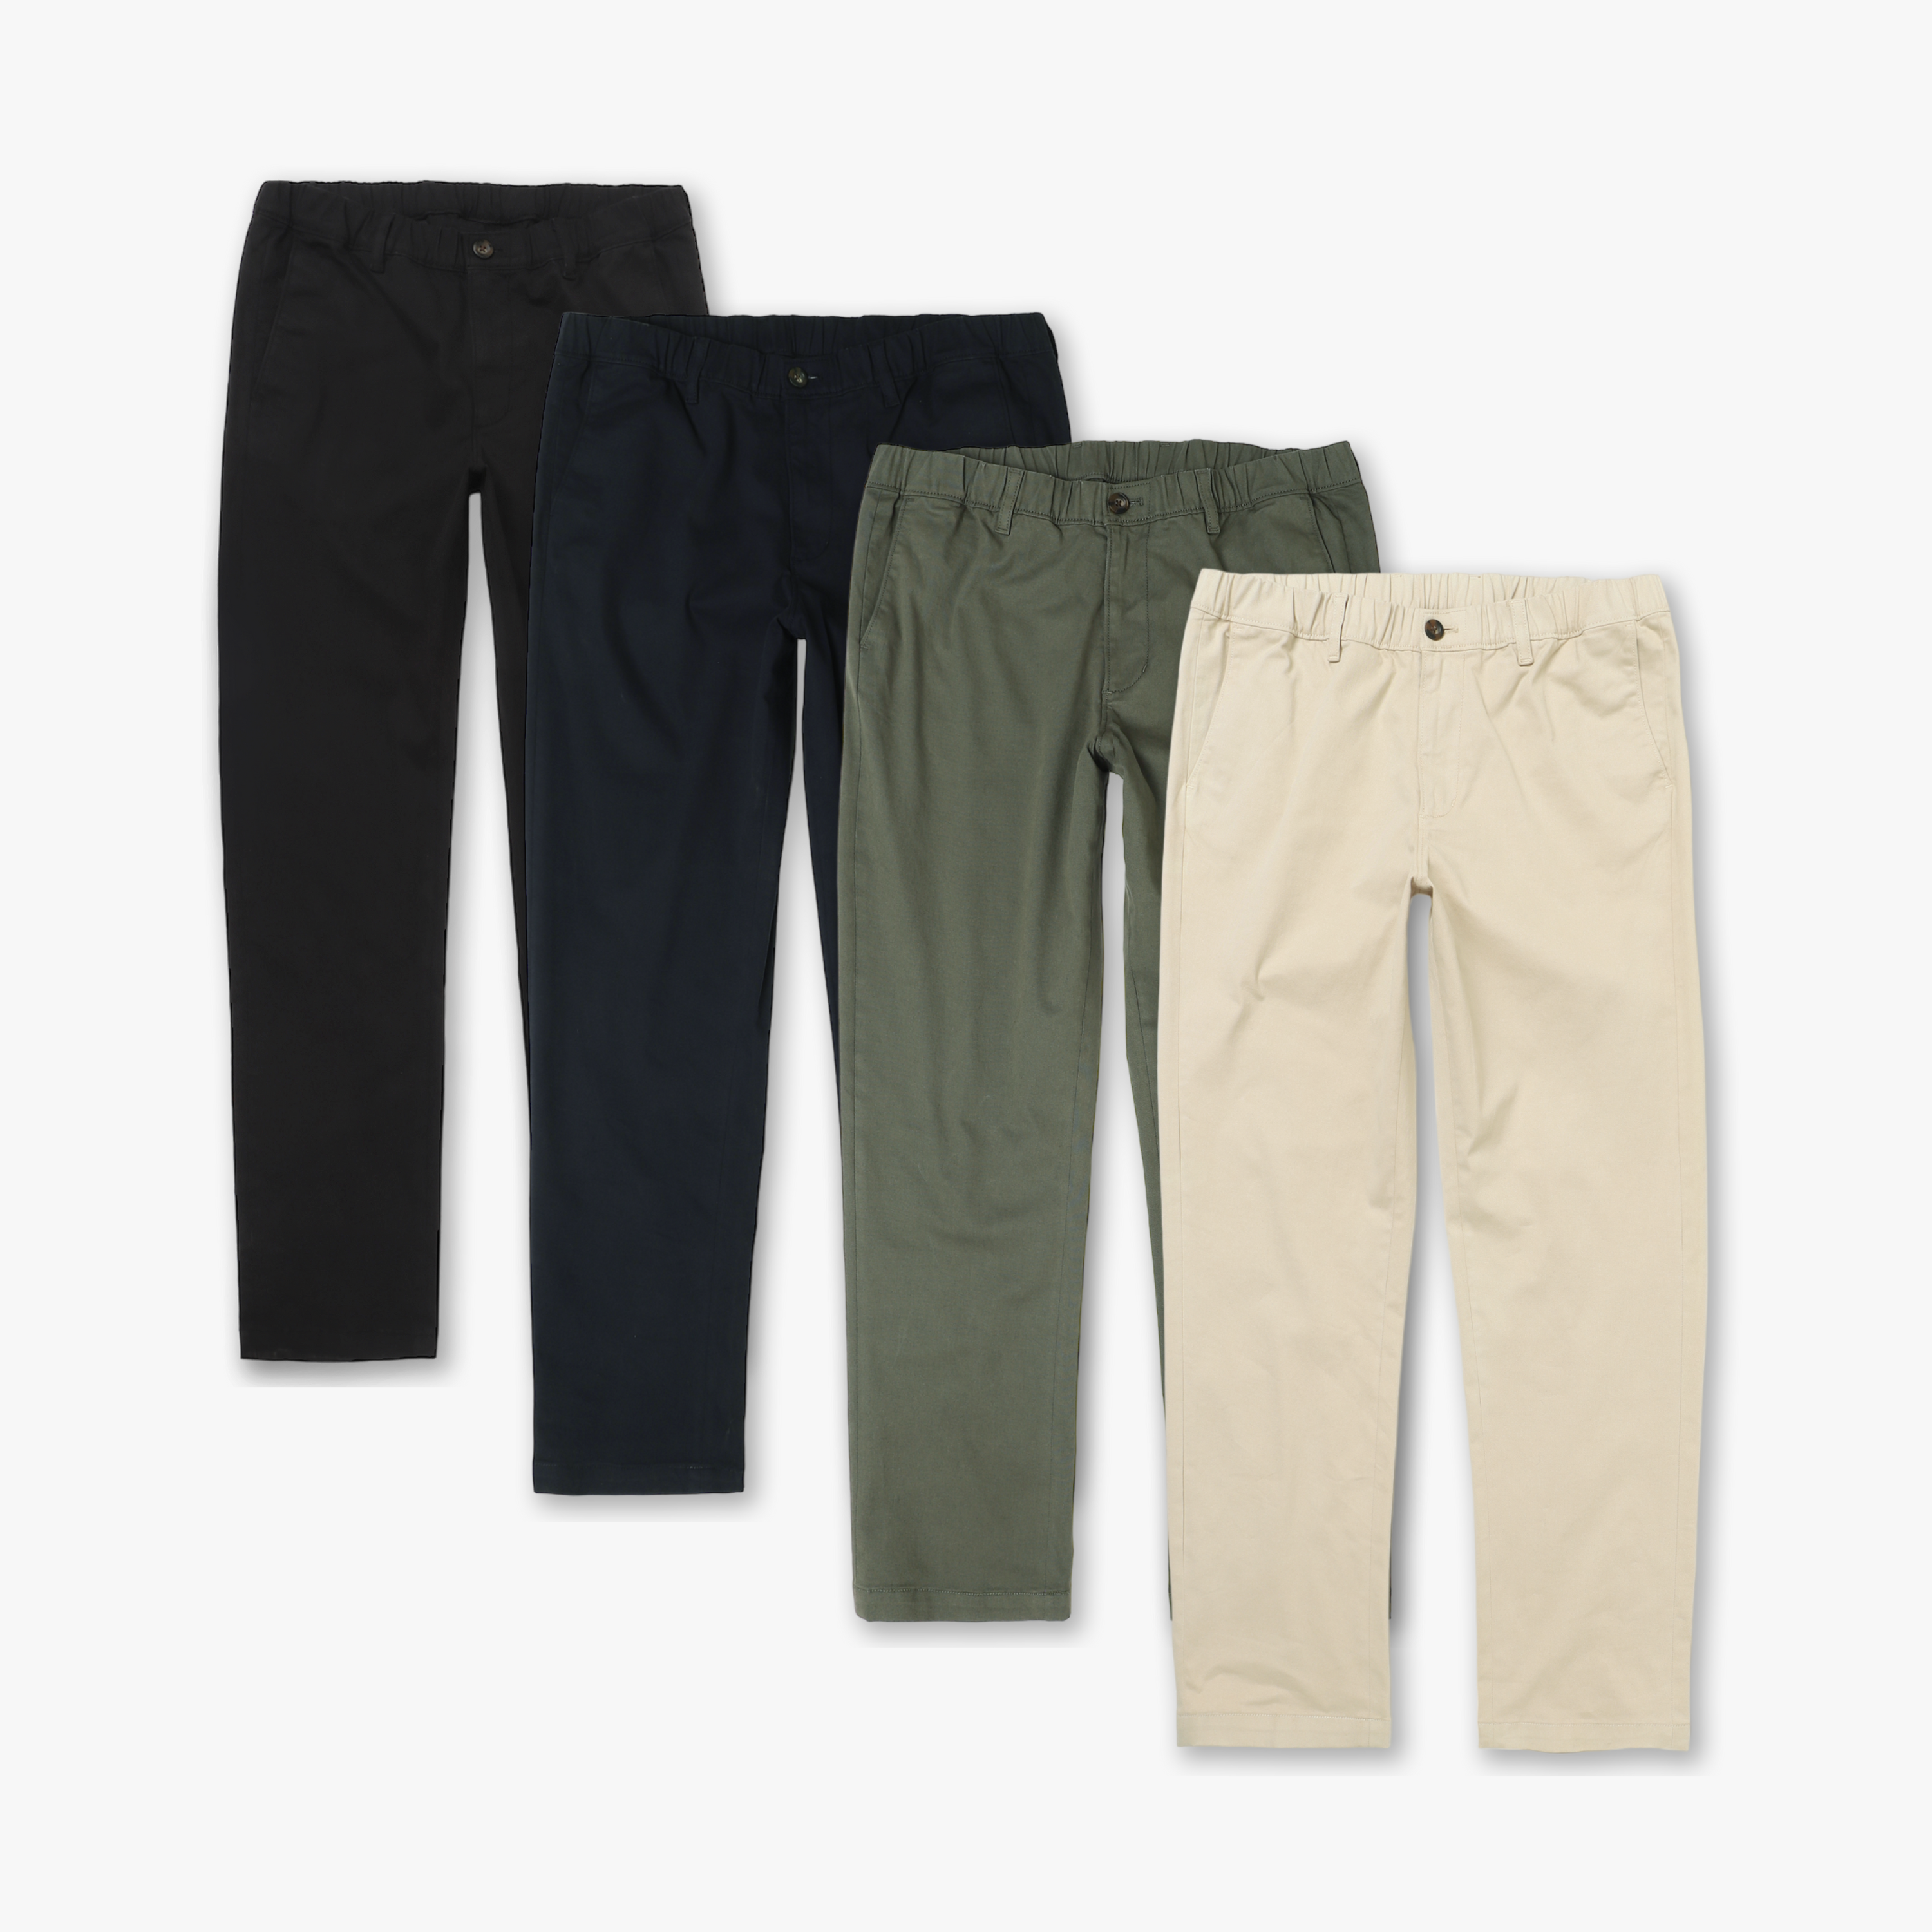 Relaxed Stretch Chino Pant Stone, Fern, Navy, and Black